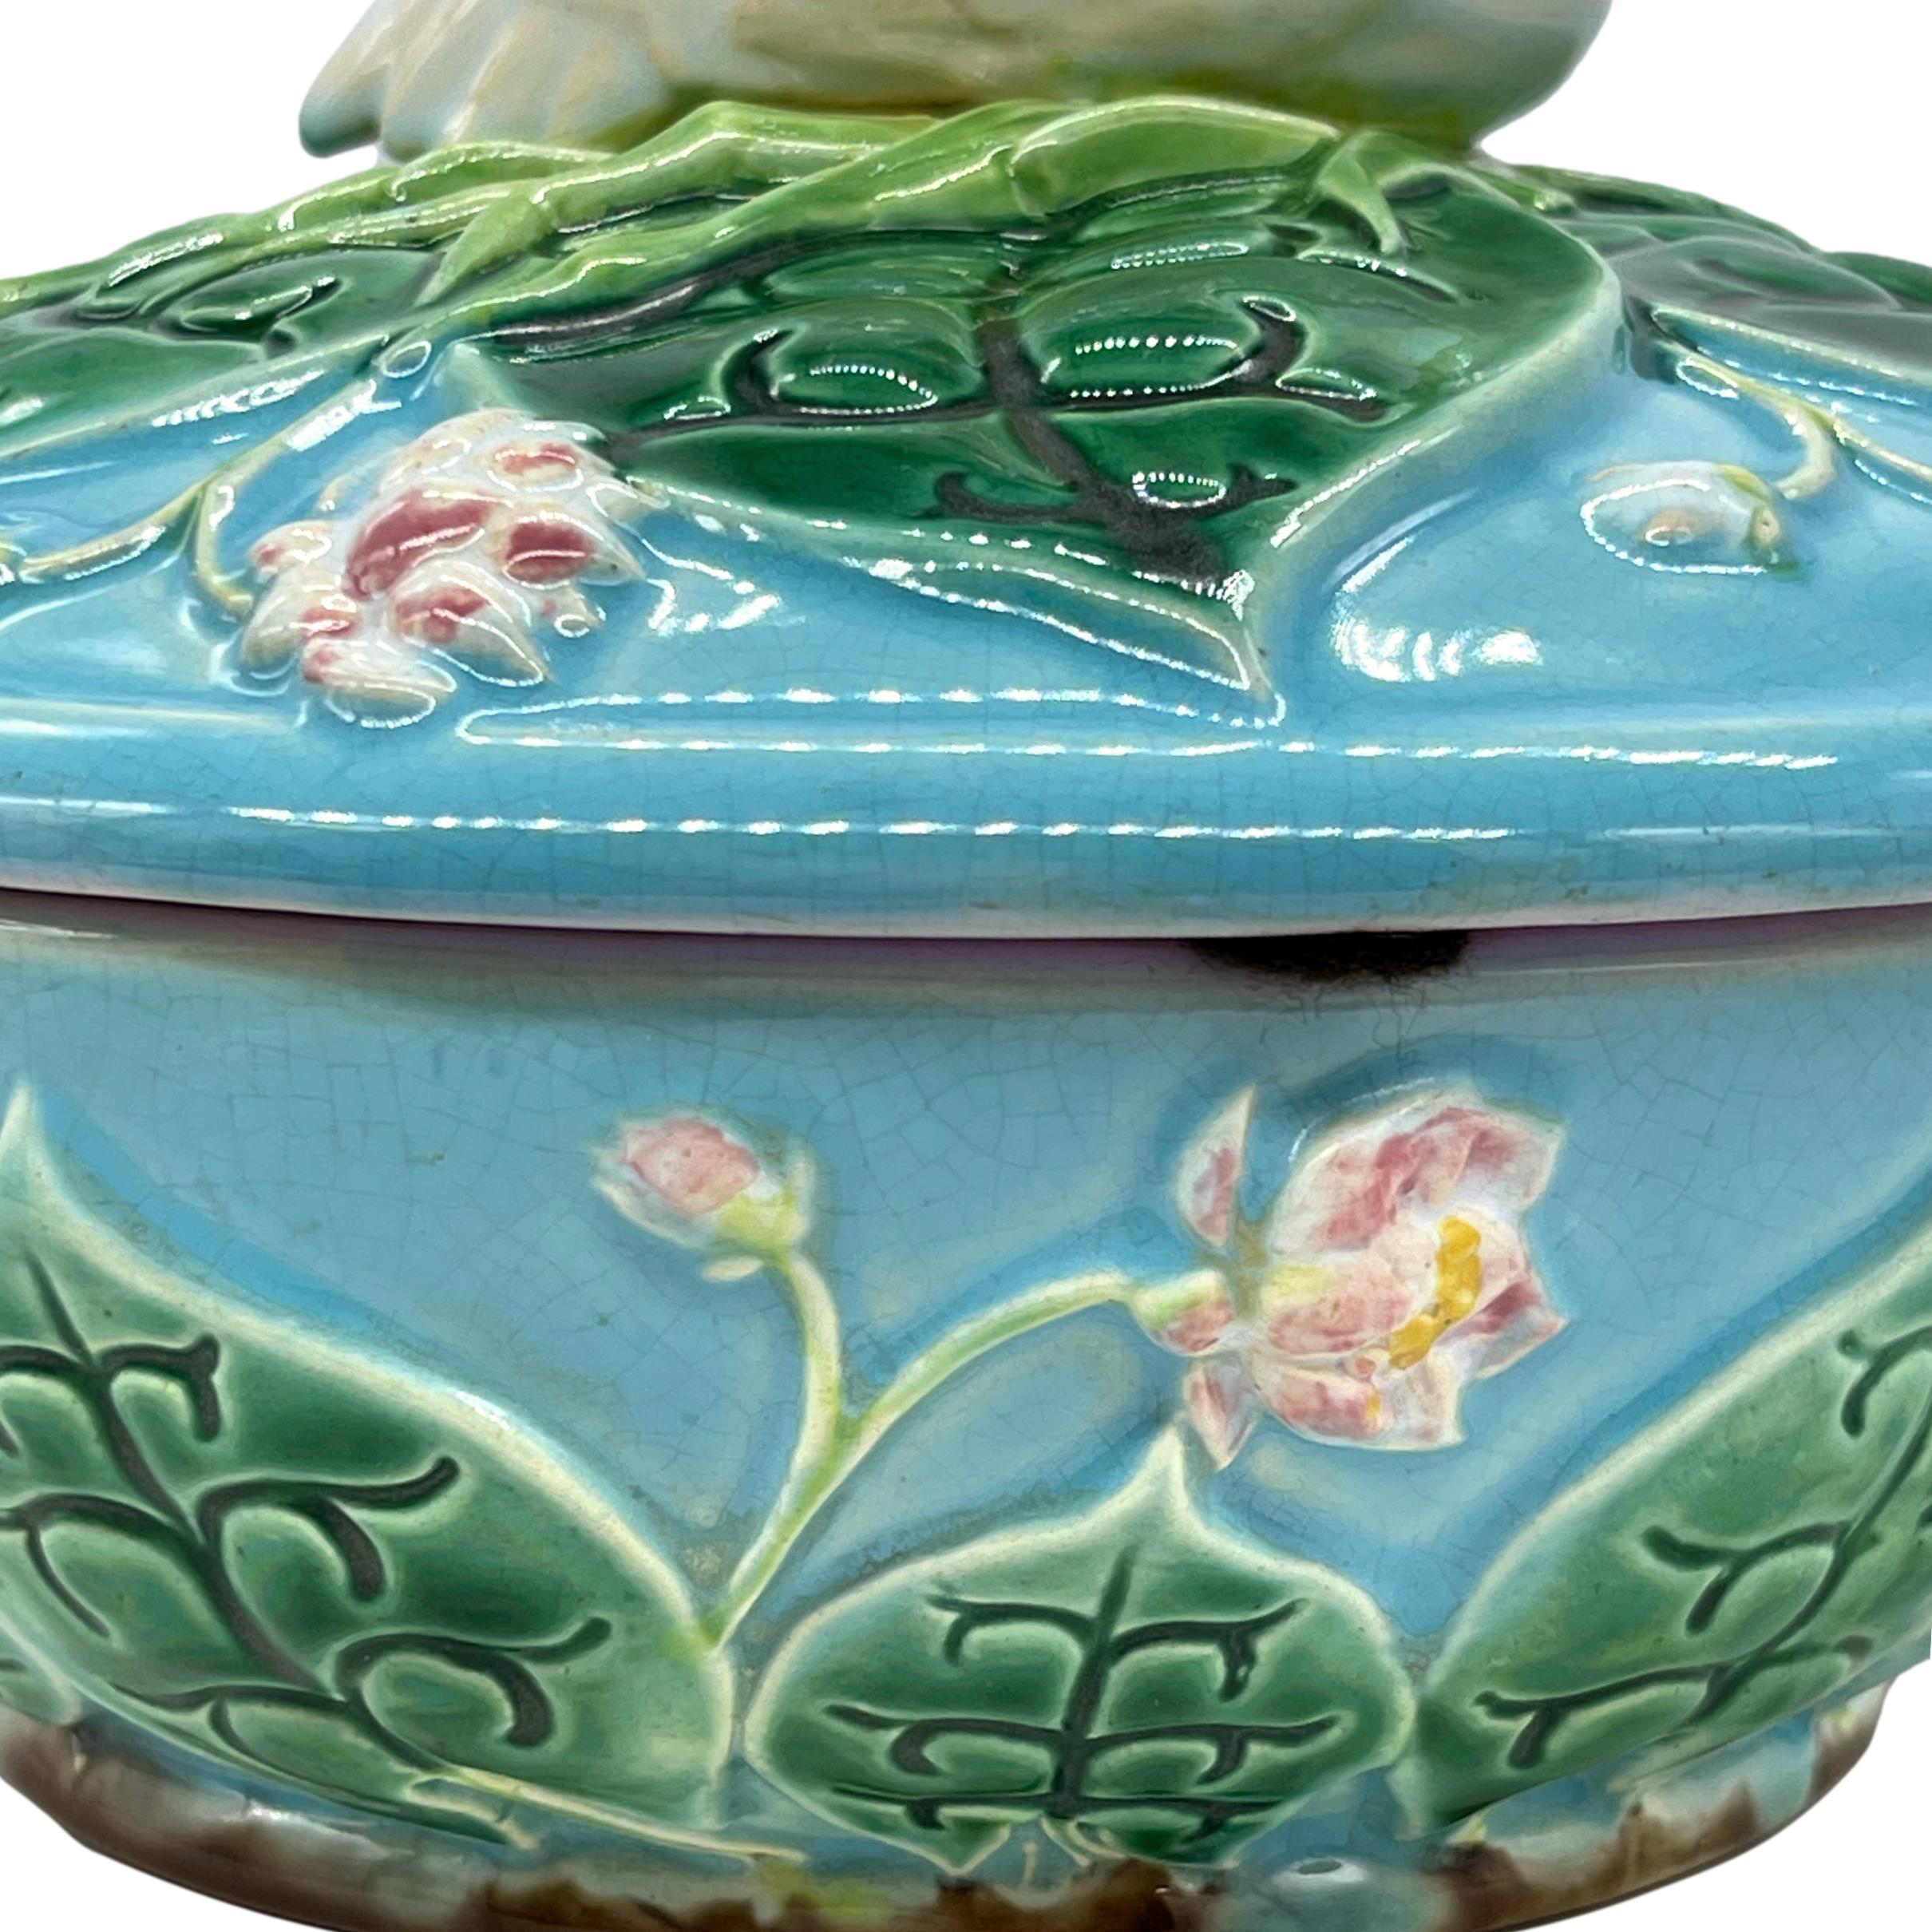 George Jones Majolica Pâté Server with Stand & Cover, 'Stork' Finial, Dated 1875 6